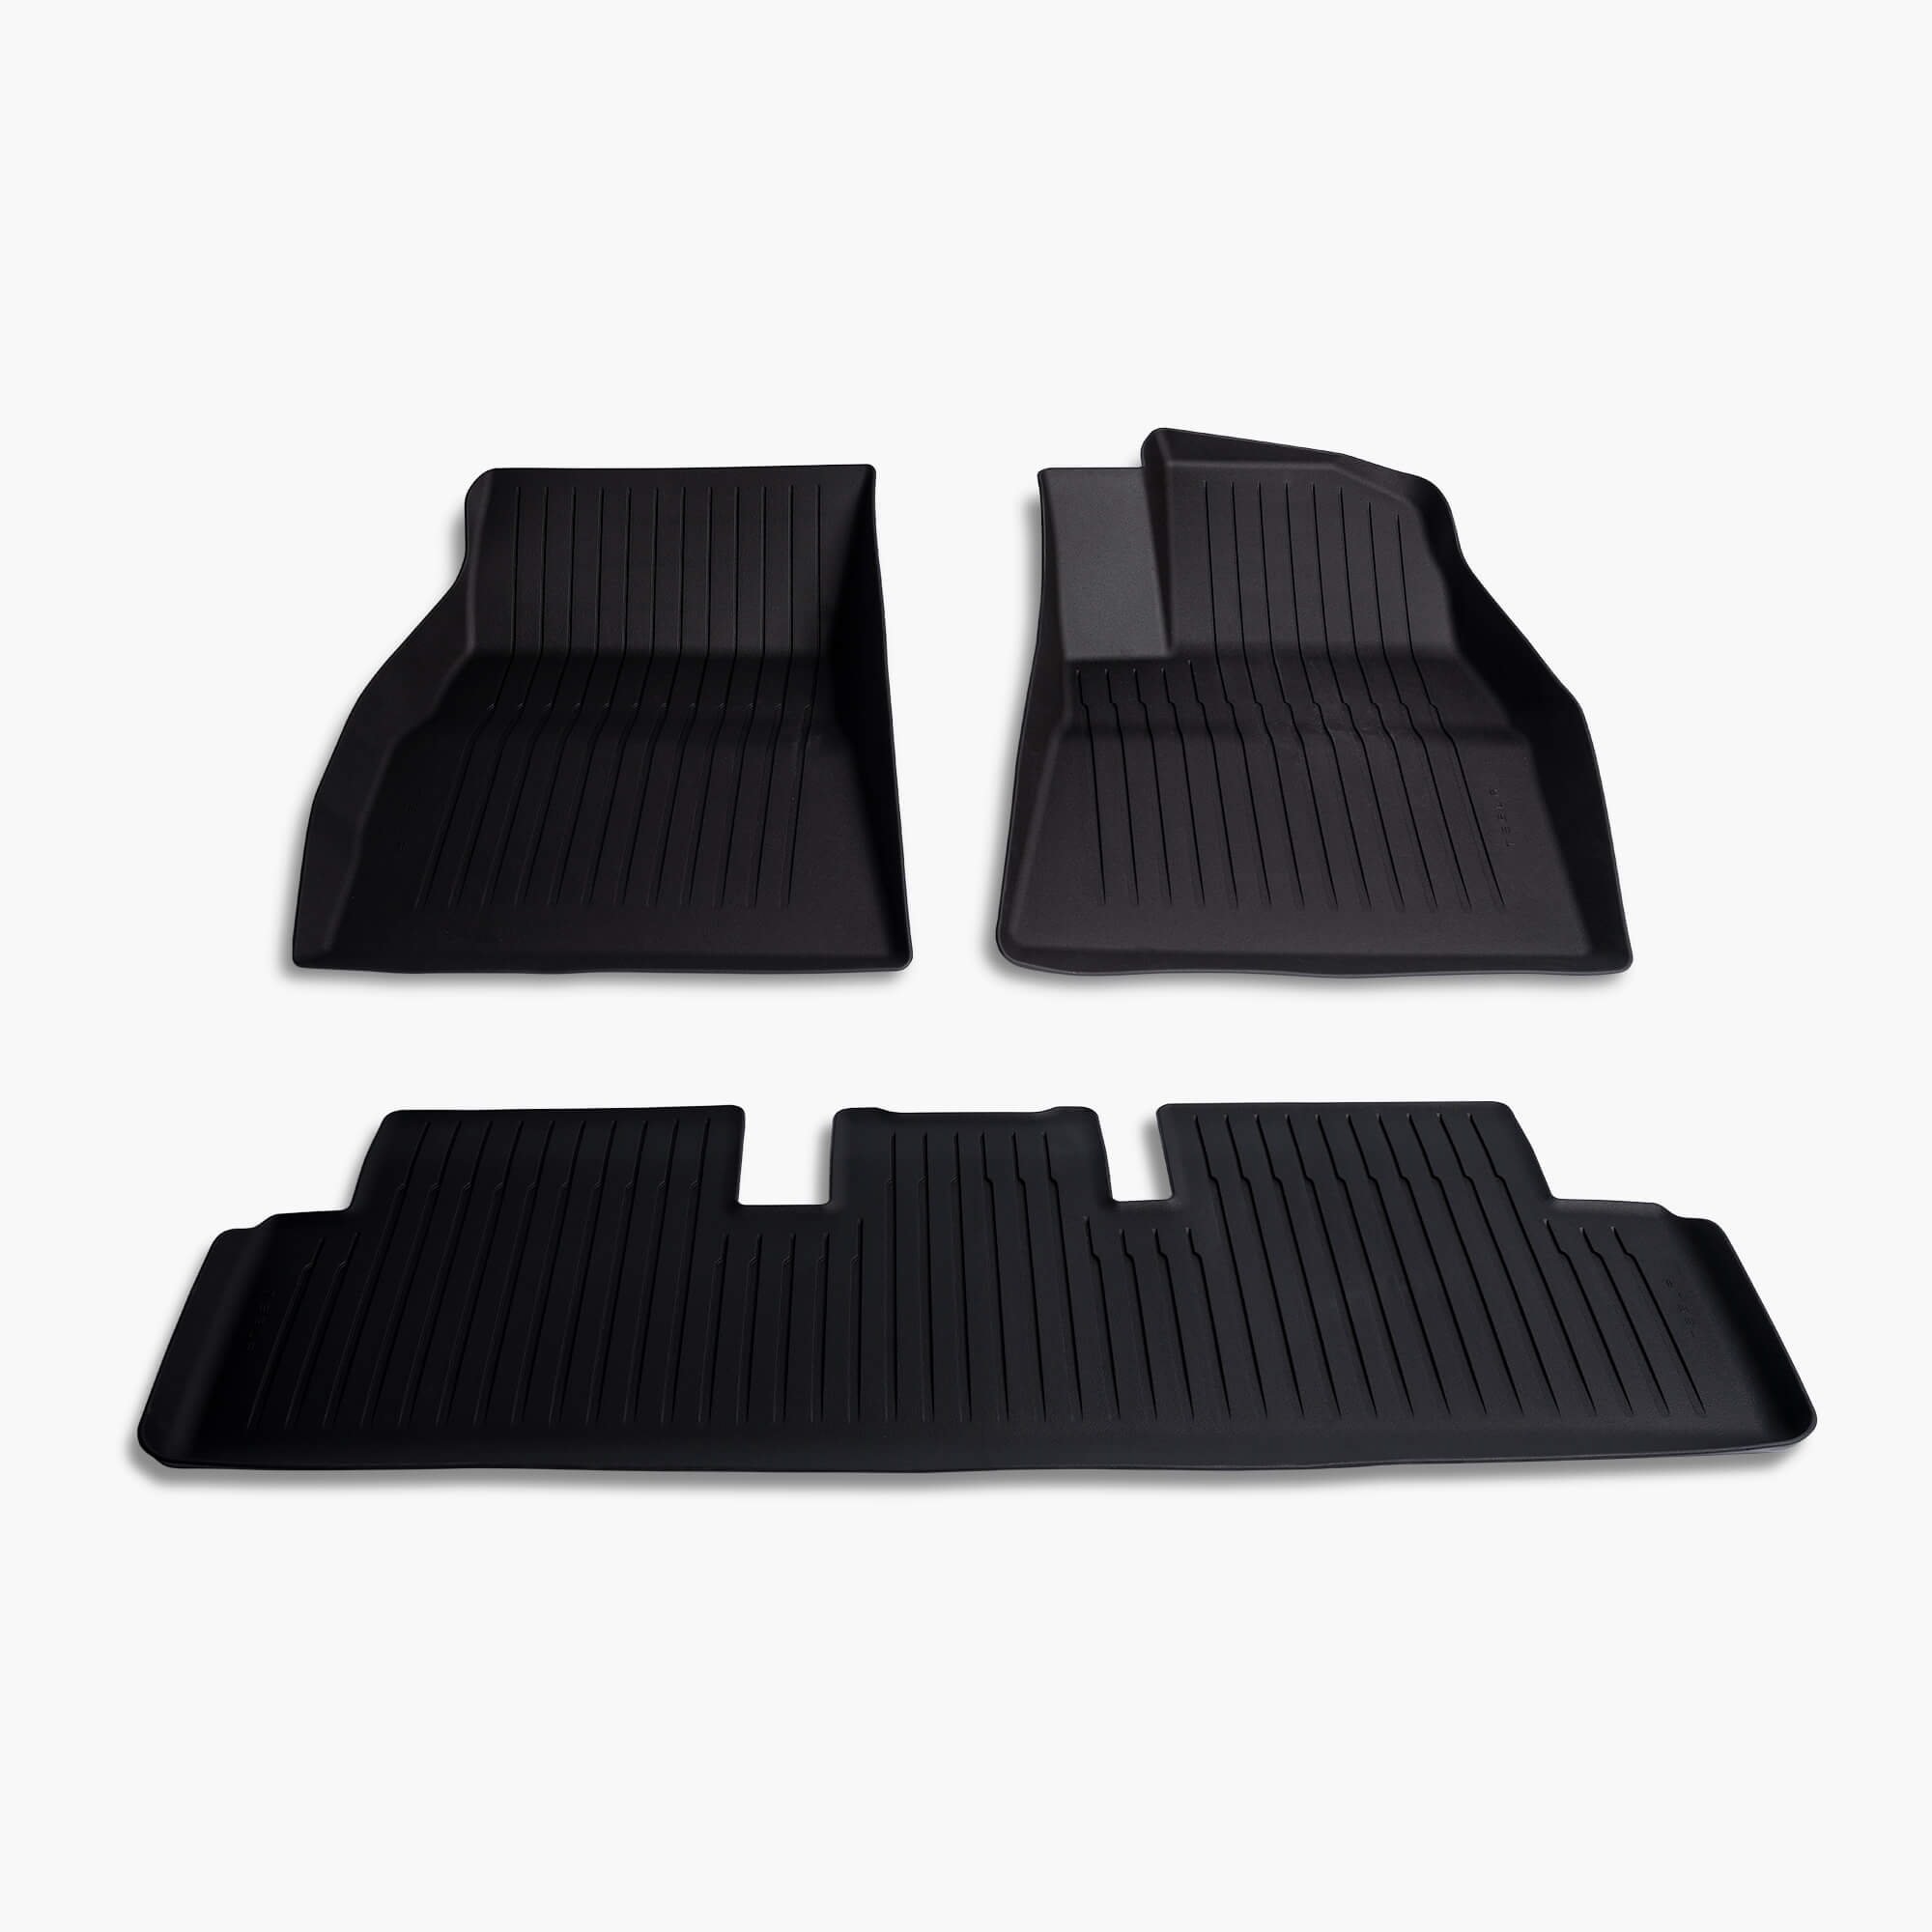 Model 3 All-Weather Interior Liners